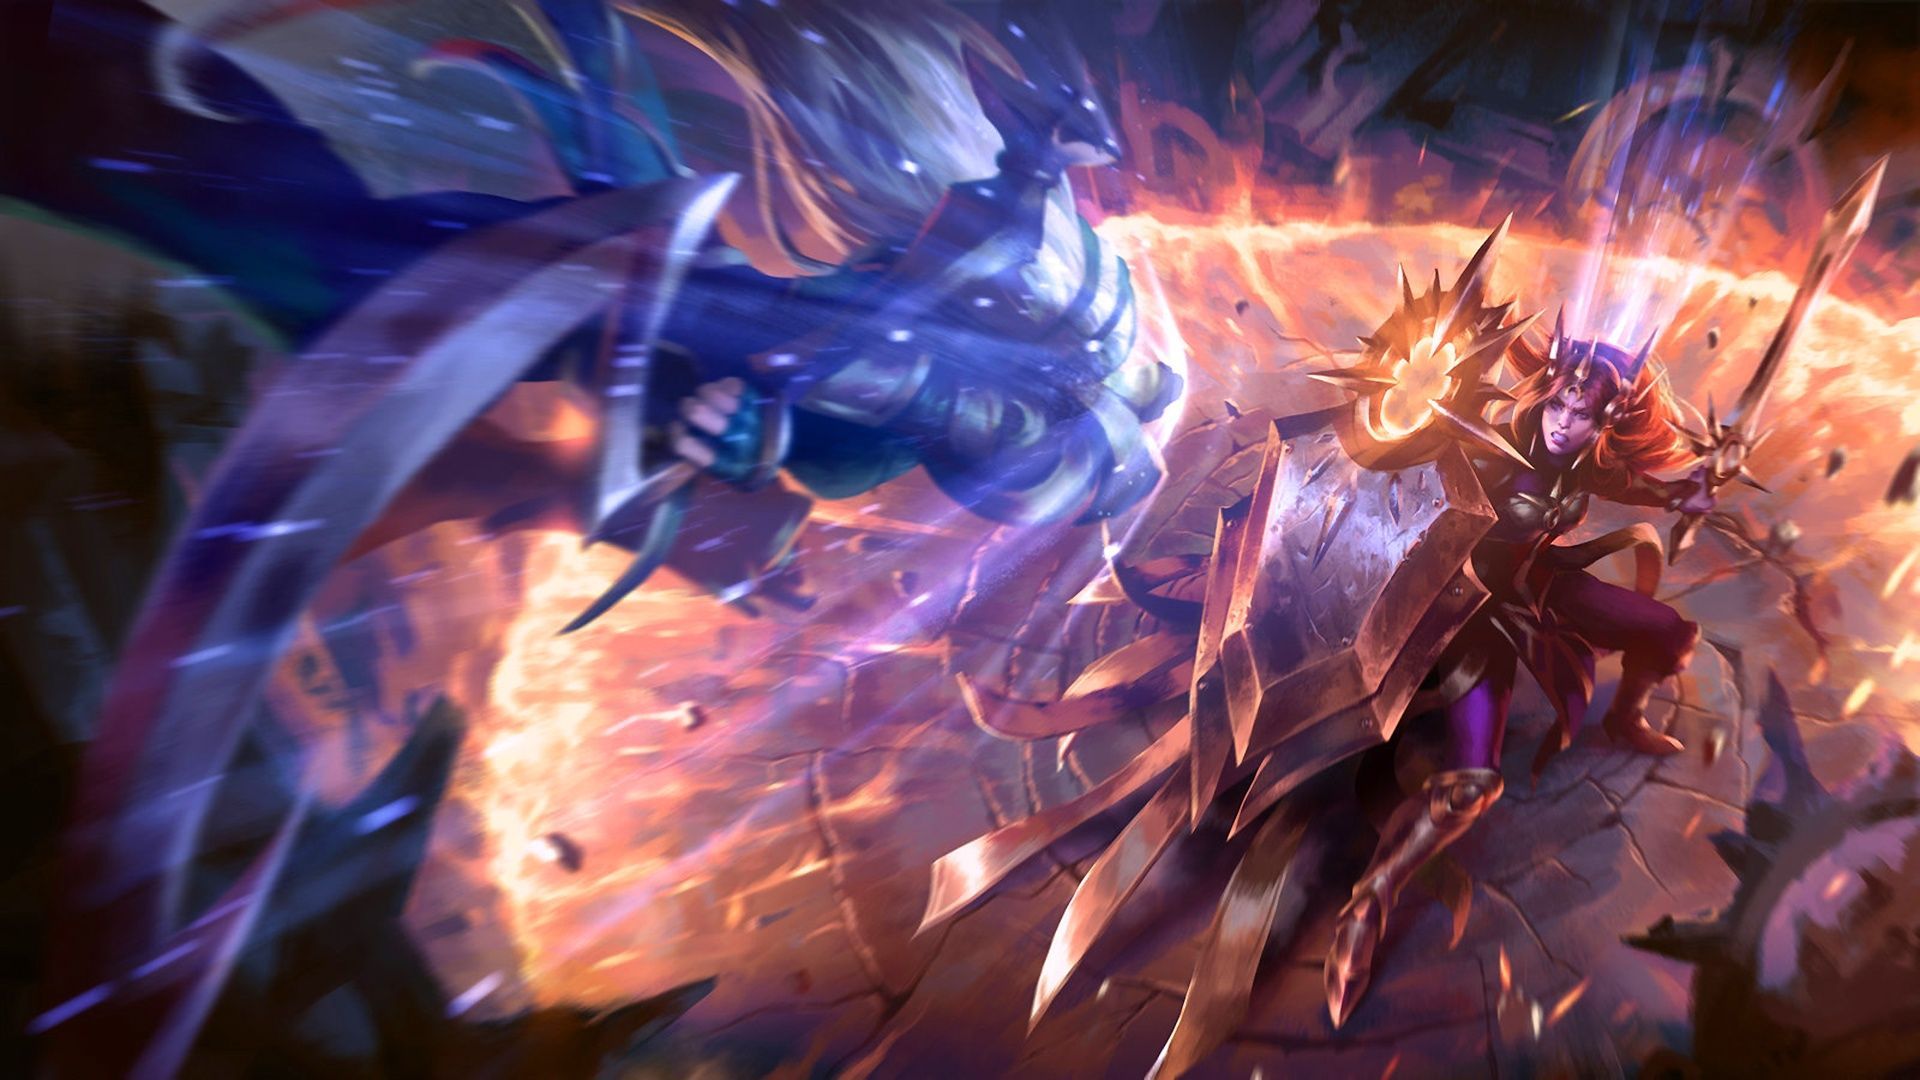 Gallery for - diana wallpaper league of legends